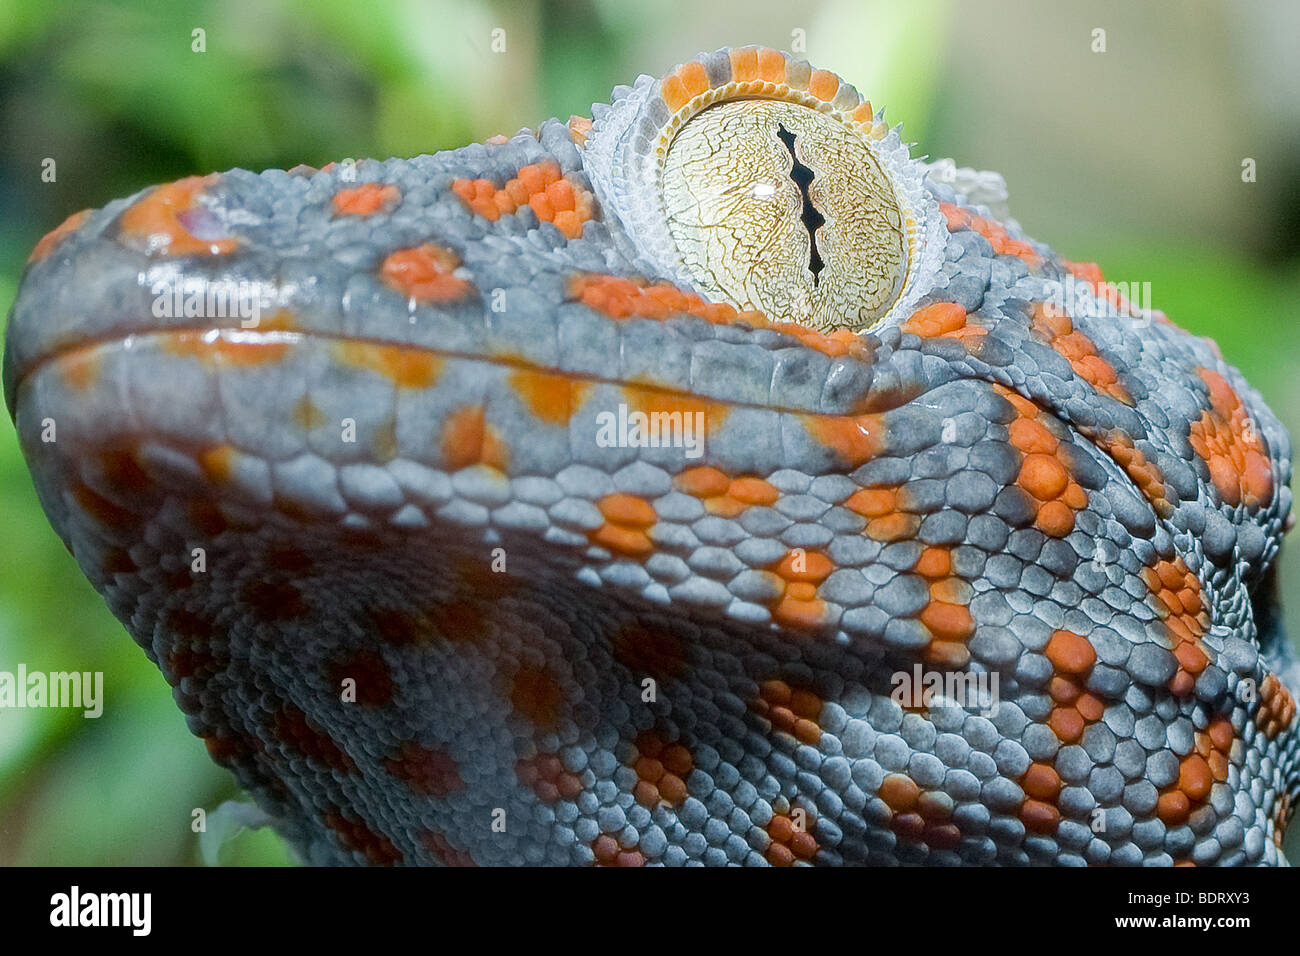 Extreme close up of a captive blue orange spotted tokay gecko with a gold / golden eye Stock Photo